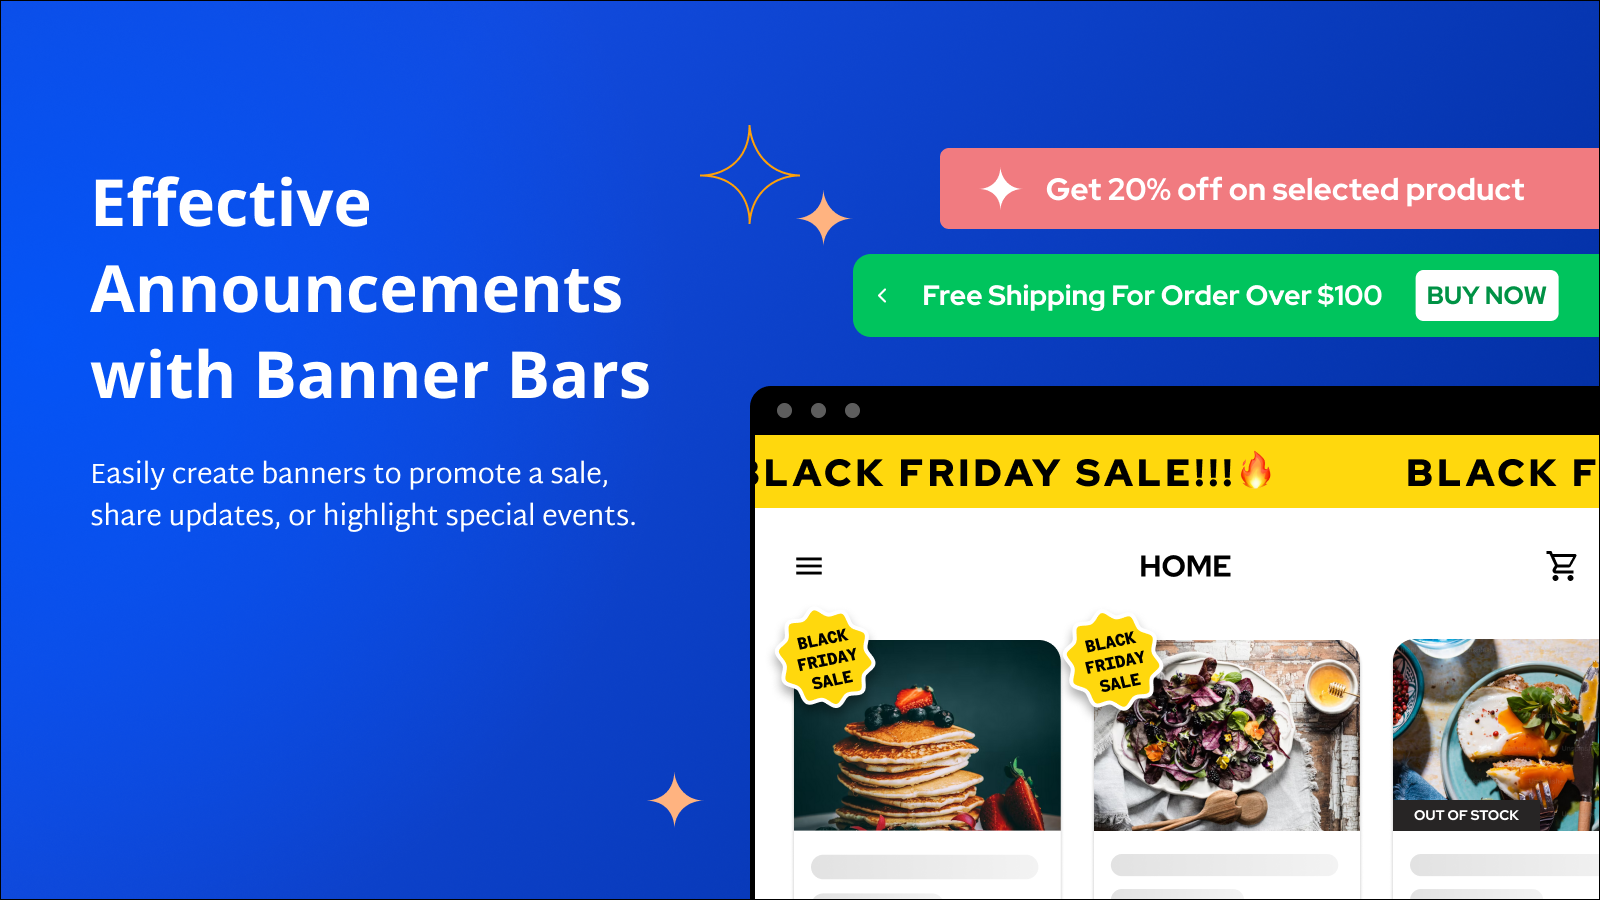 Effective Announcements with Banner Bars to promote sale, events